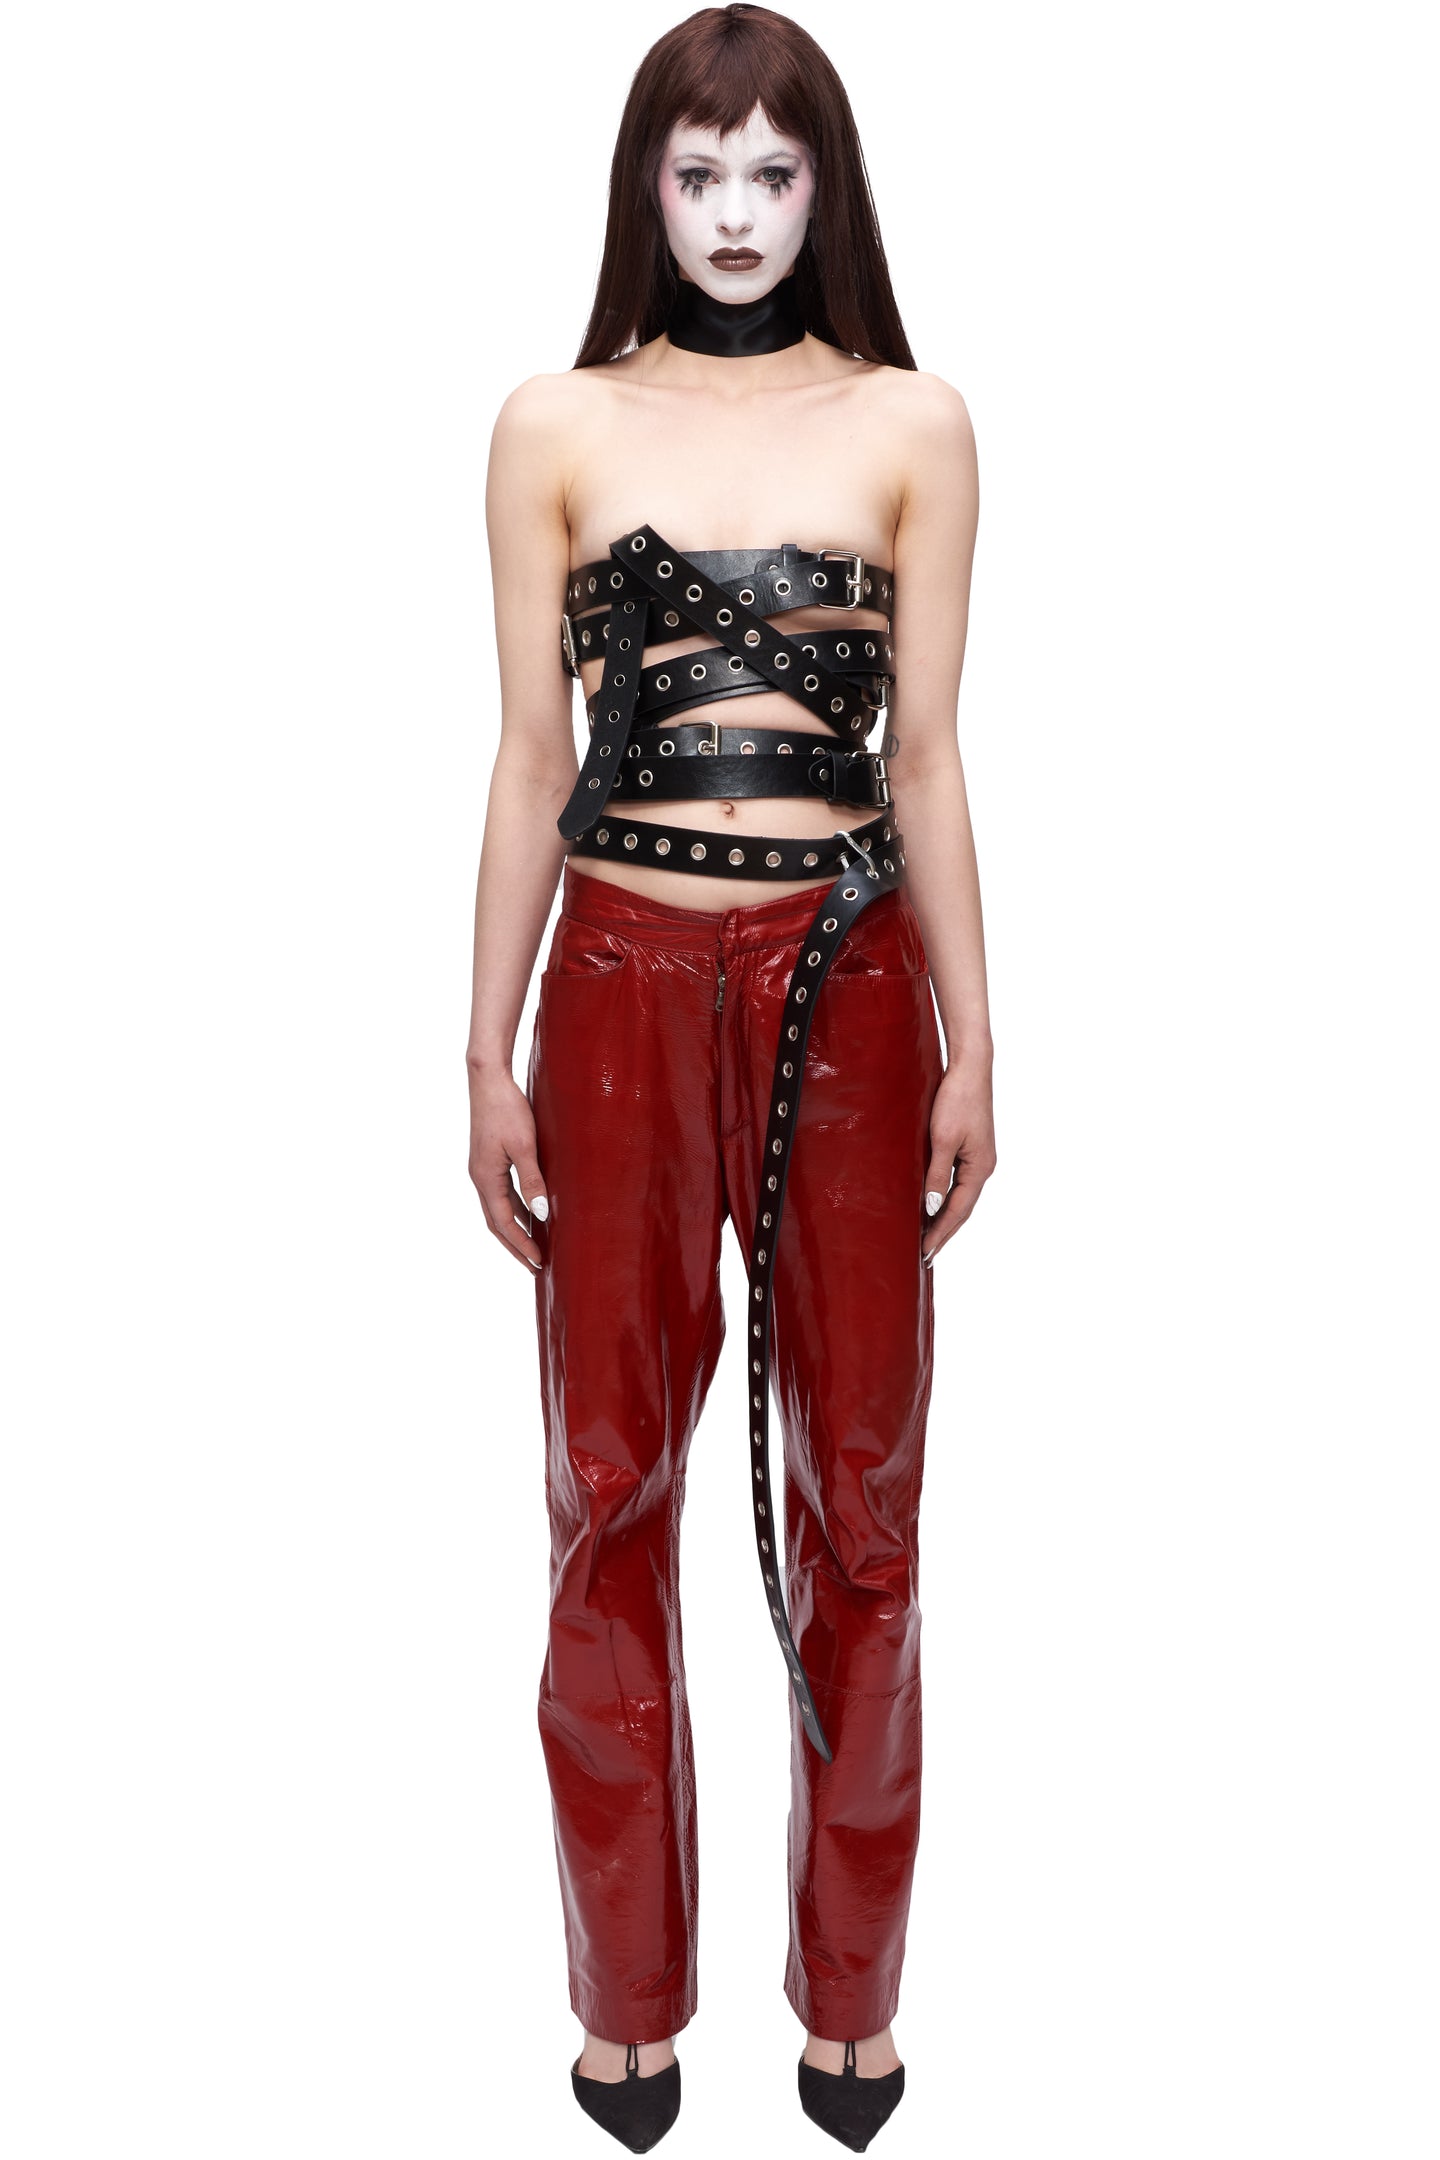 GUCCI BY TOM FORD FW99 RED LEATHER PANTS